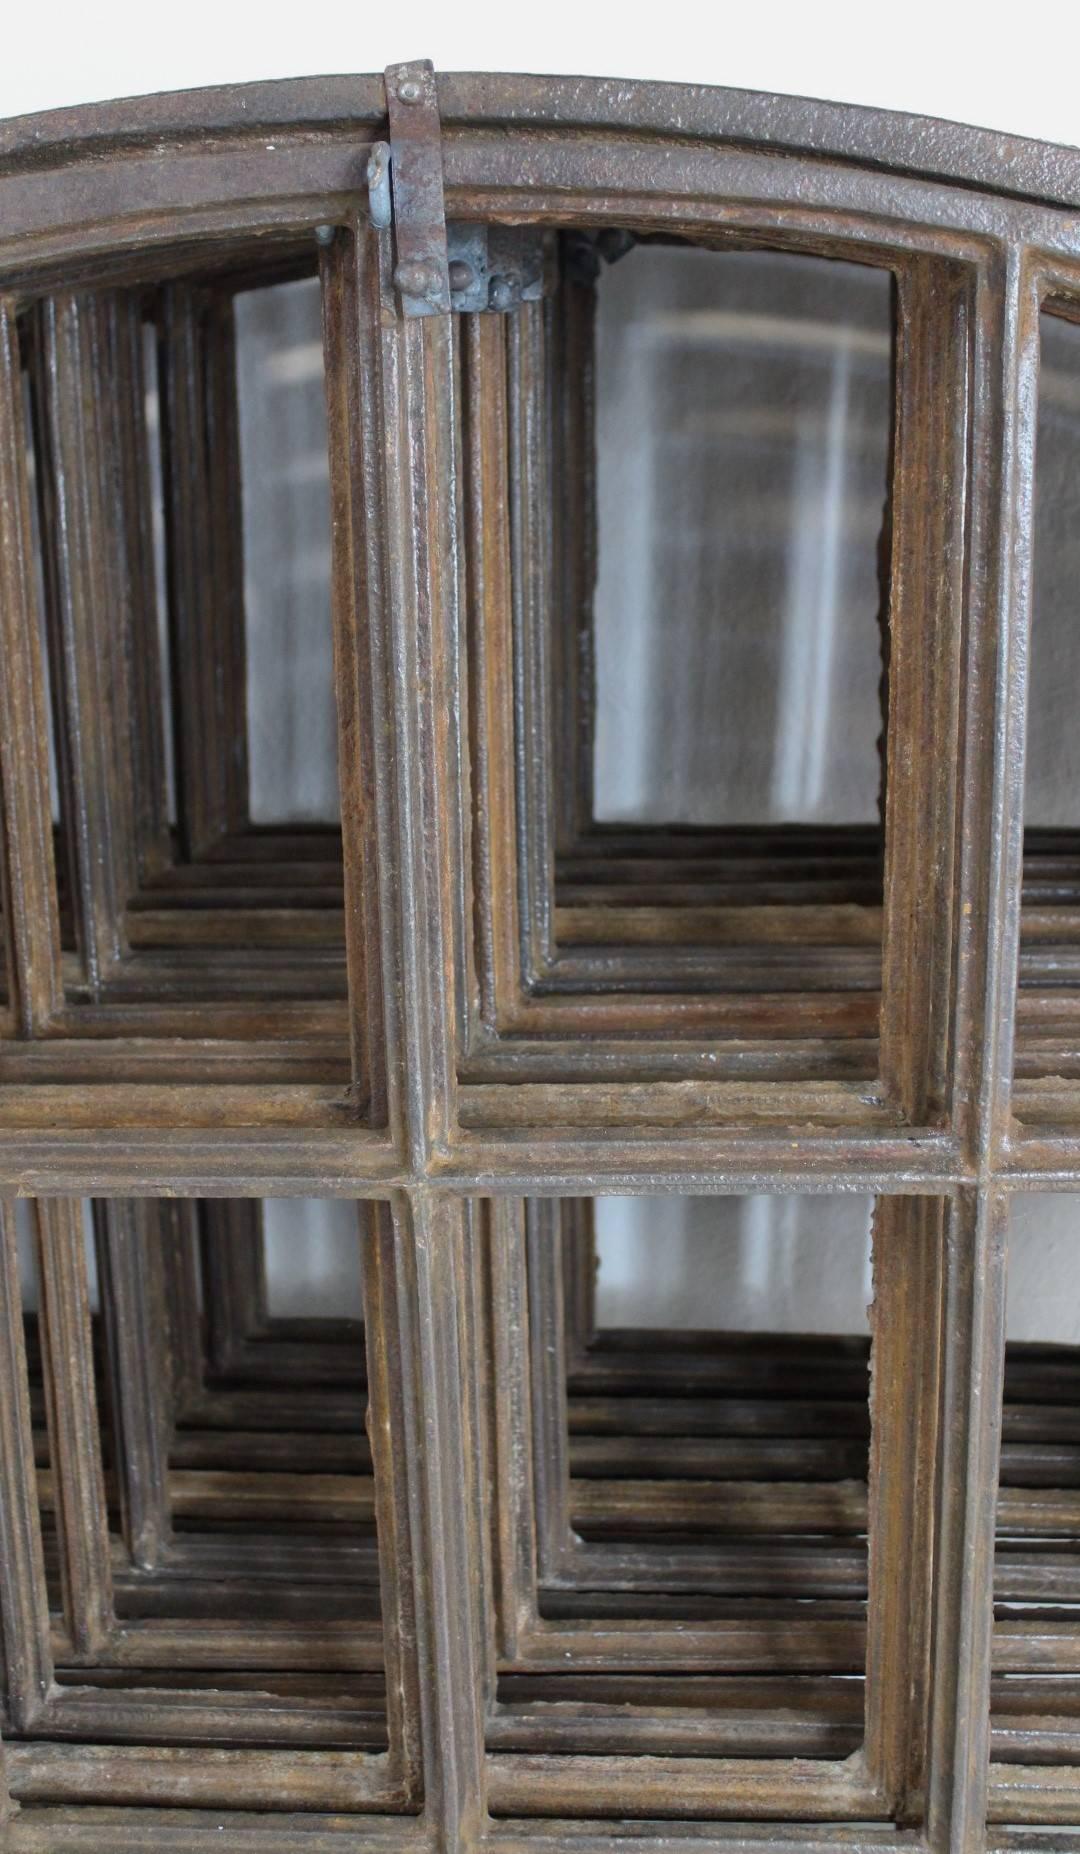 19th Century Industrial Iron Window Frame, 20 pcs available 2